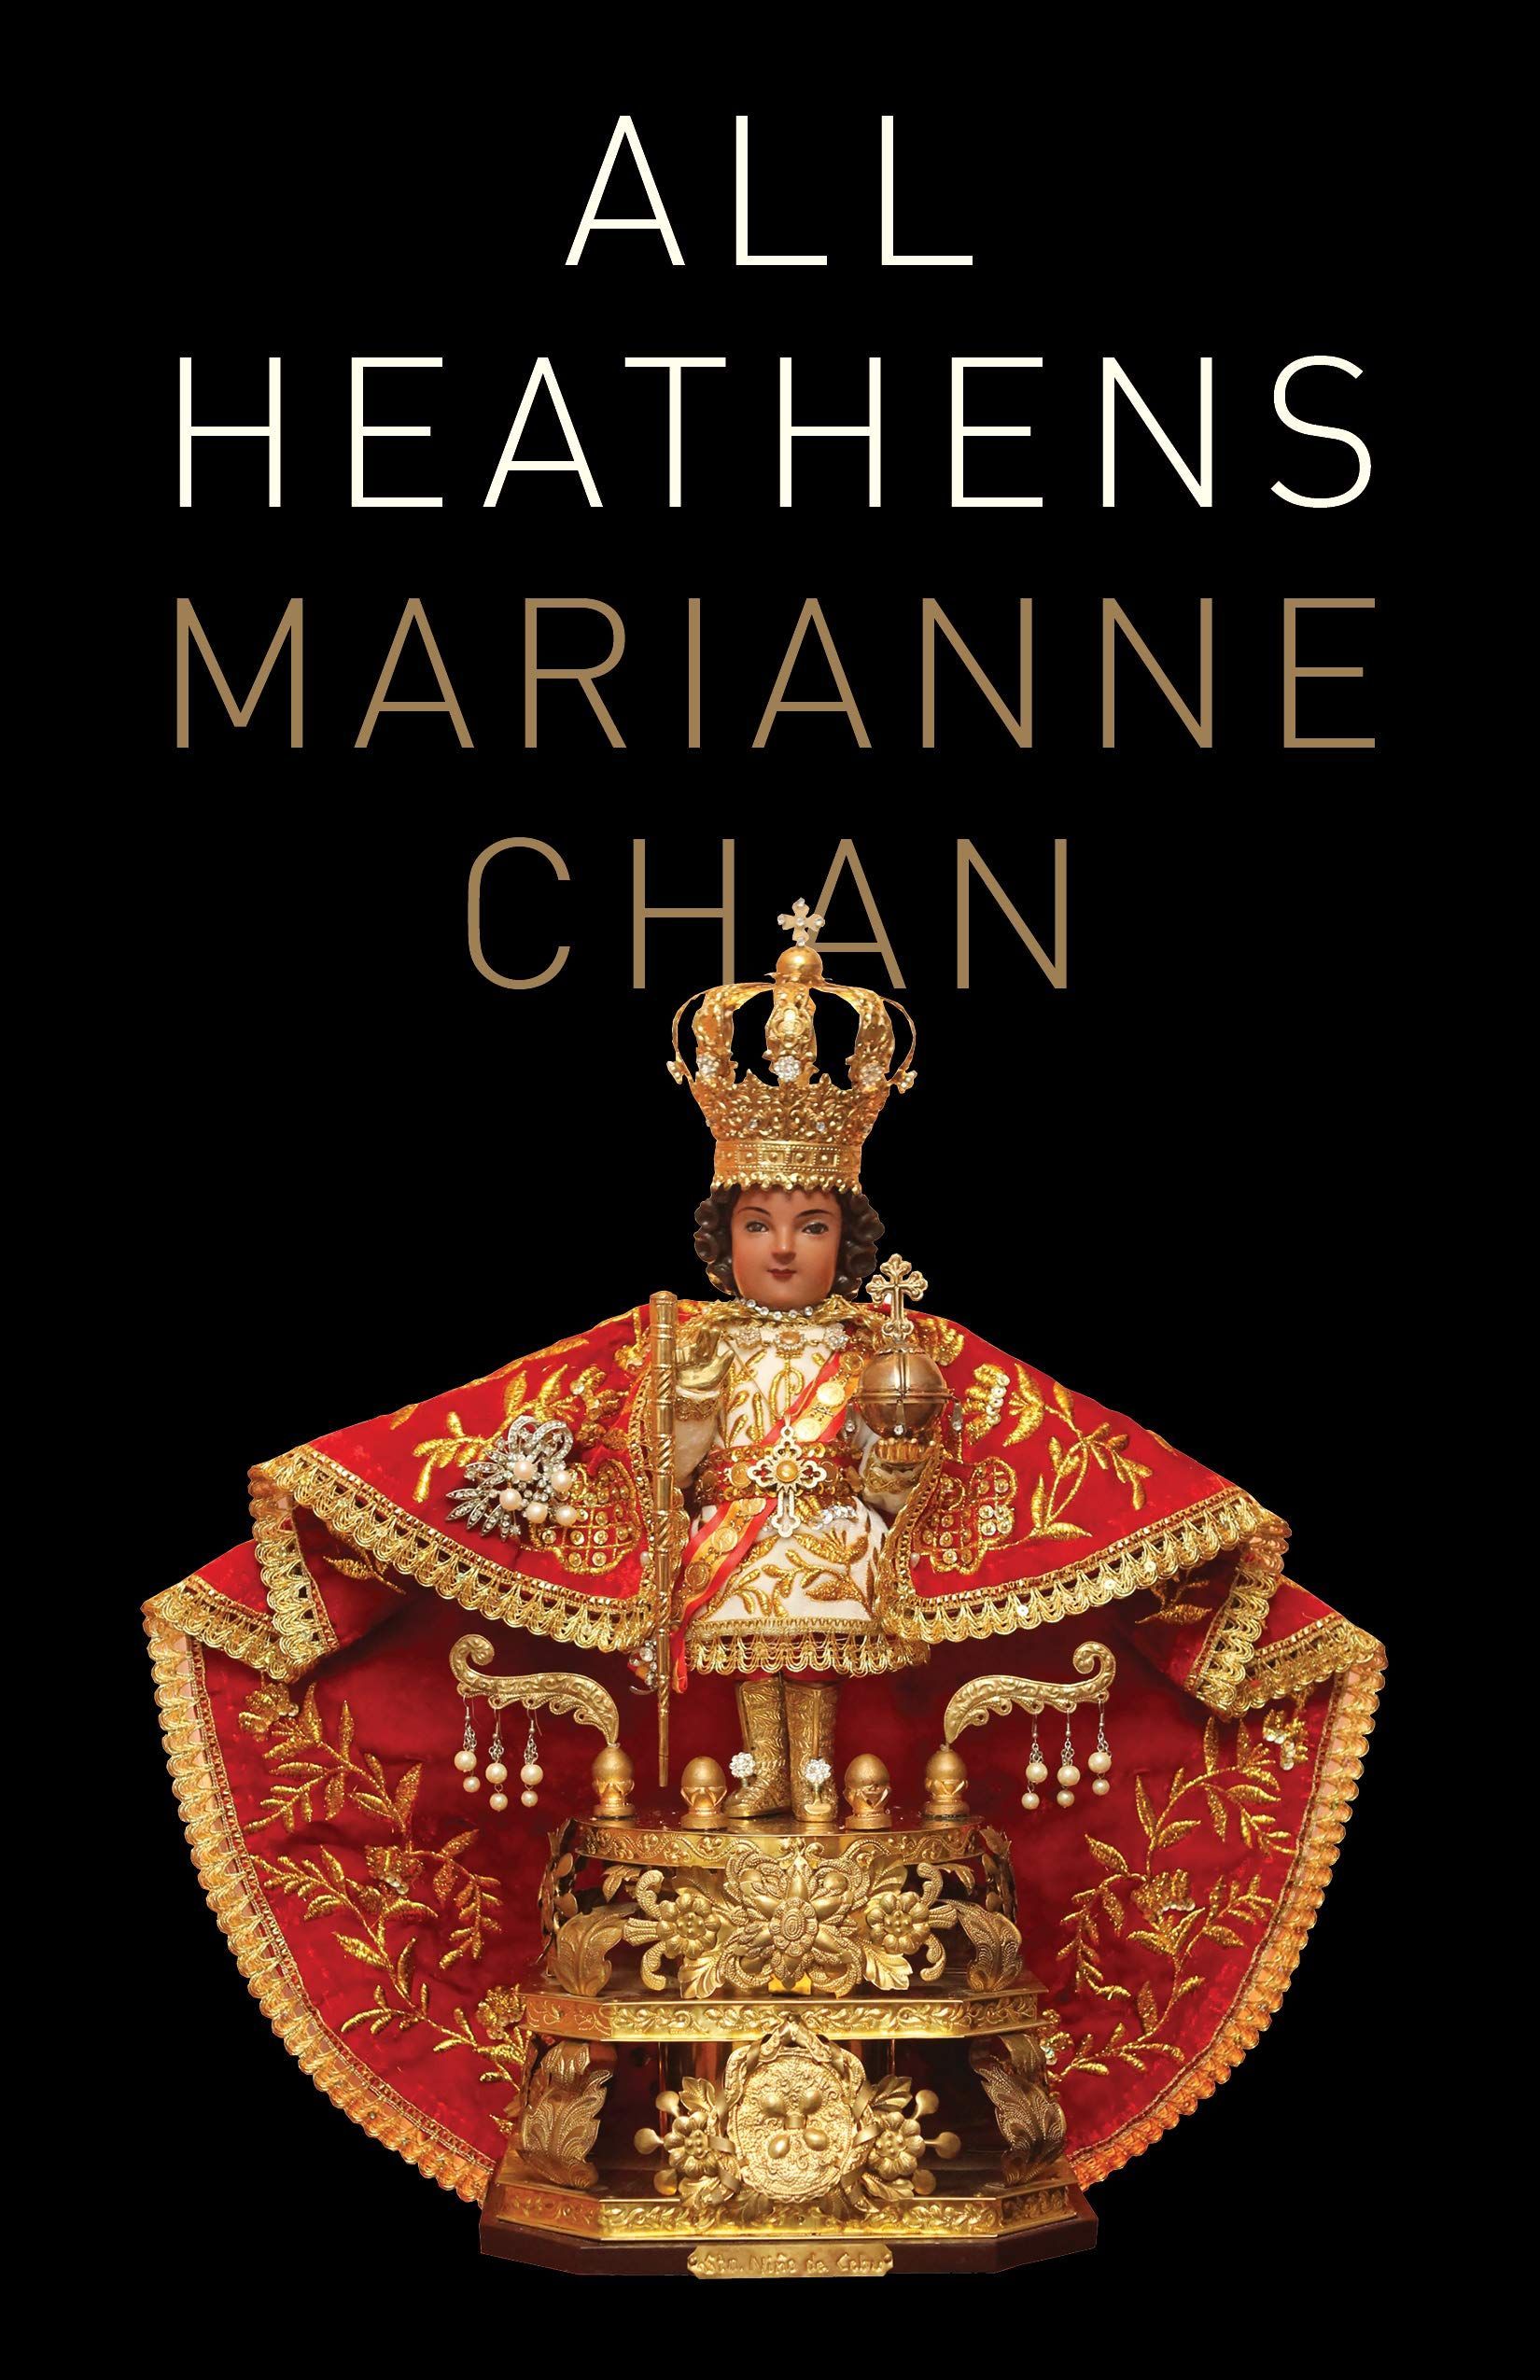 “Written into Life”: On Marianne Chan’s “All Heathens”